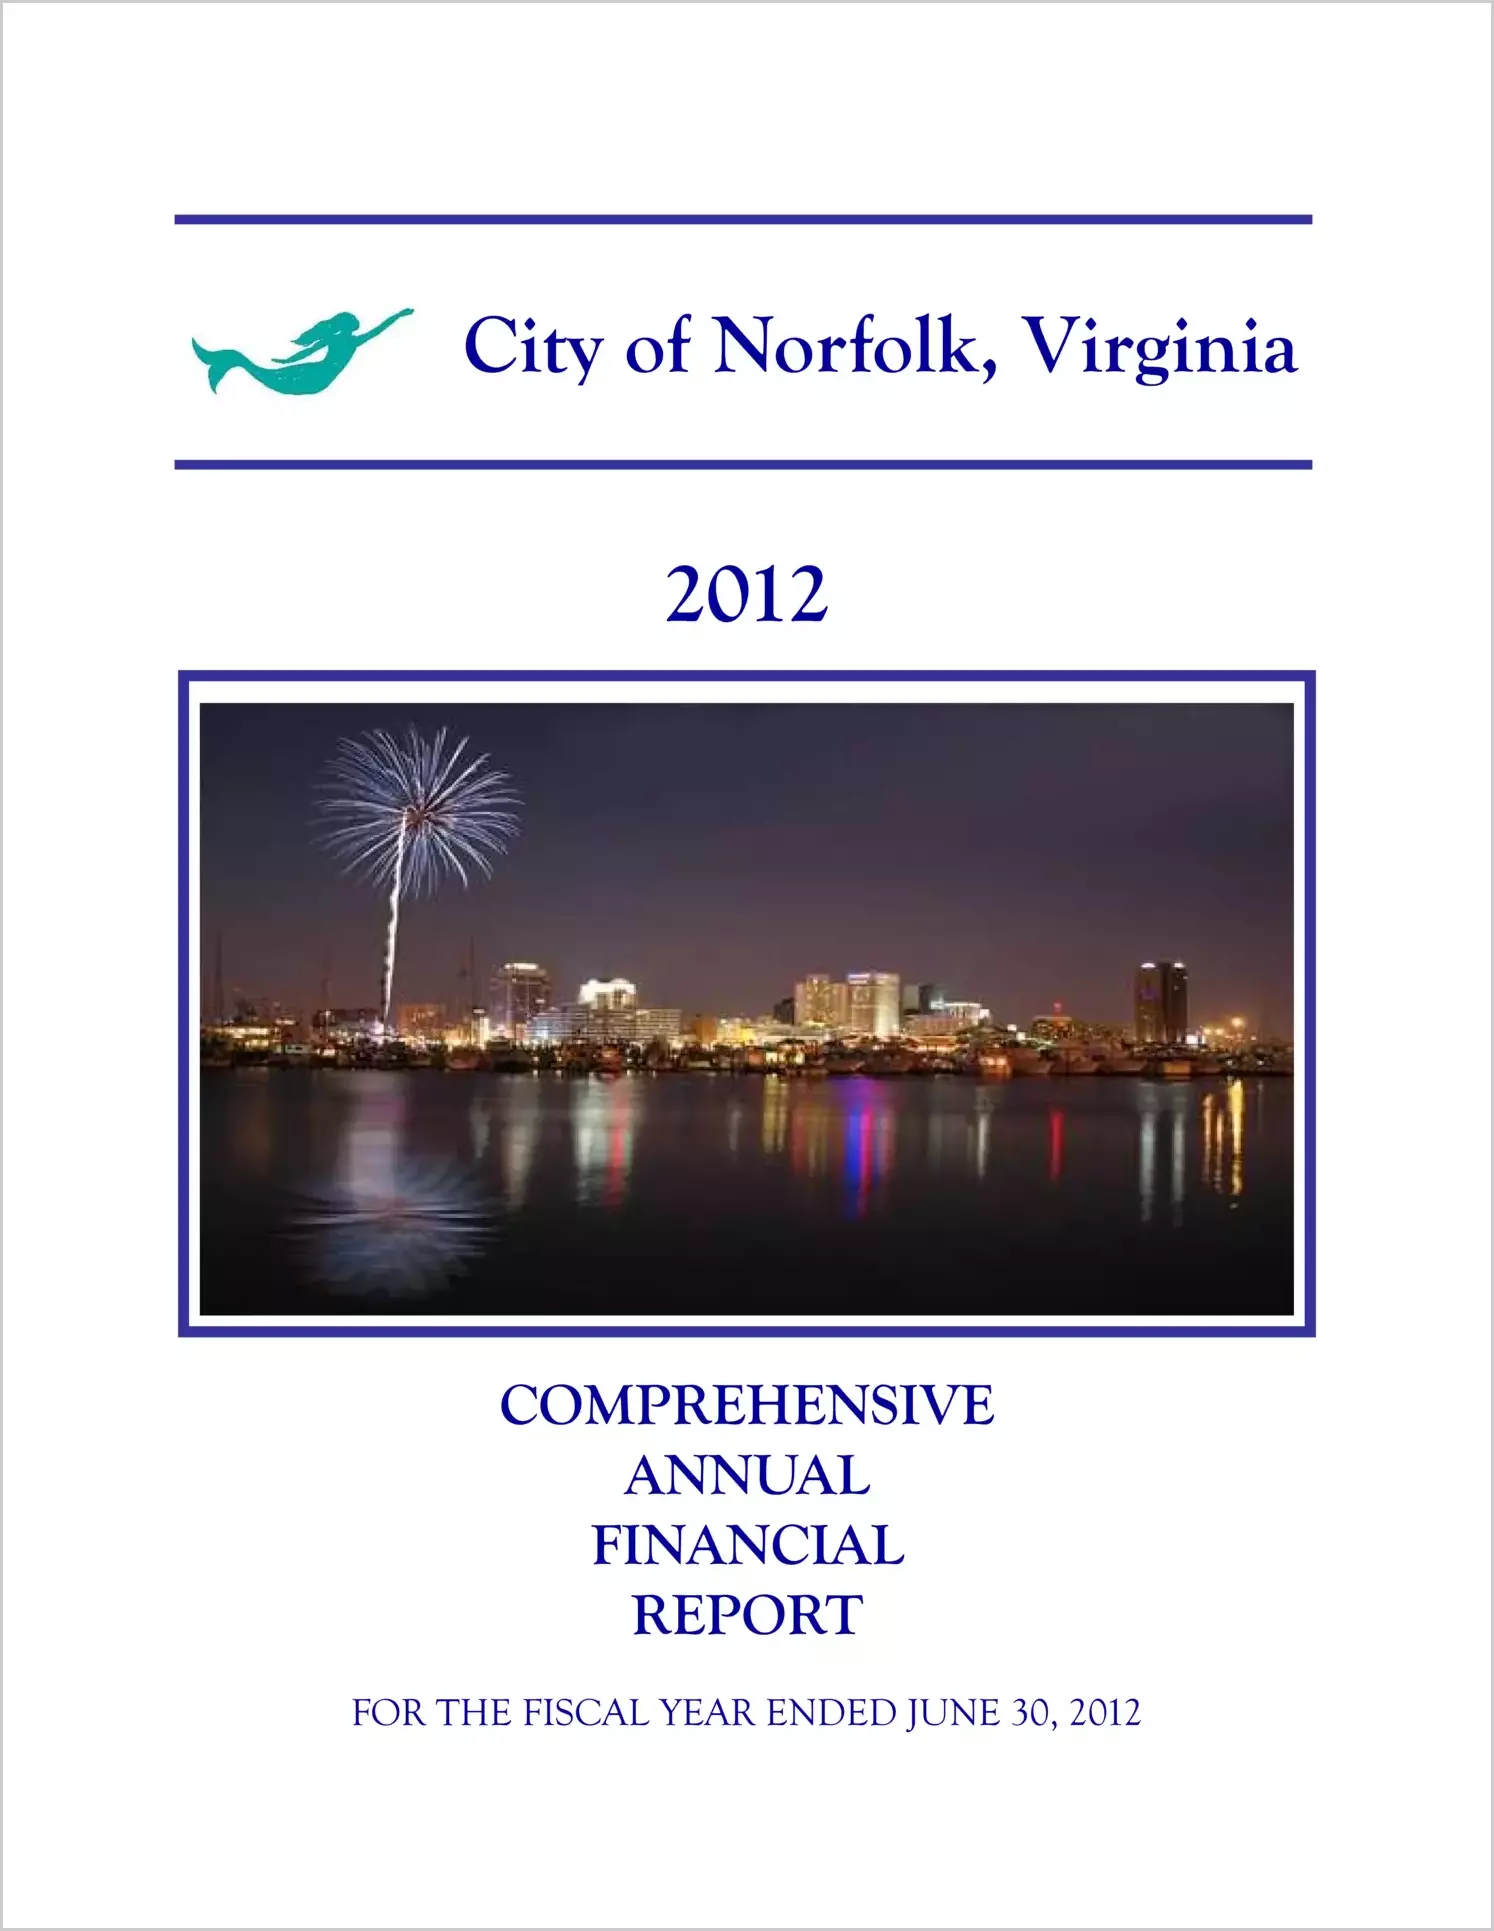 2012 Annual Financial Report for City of Norfolk